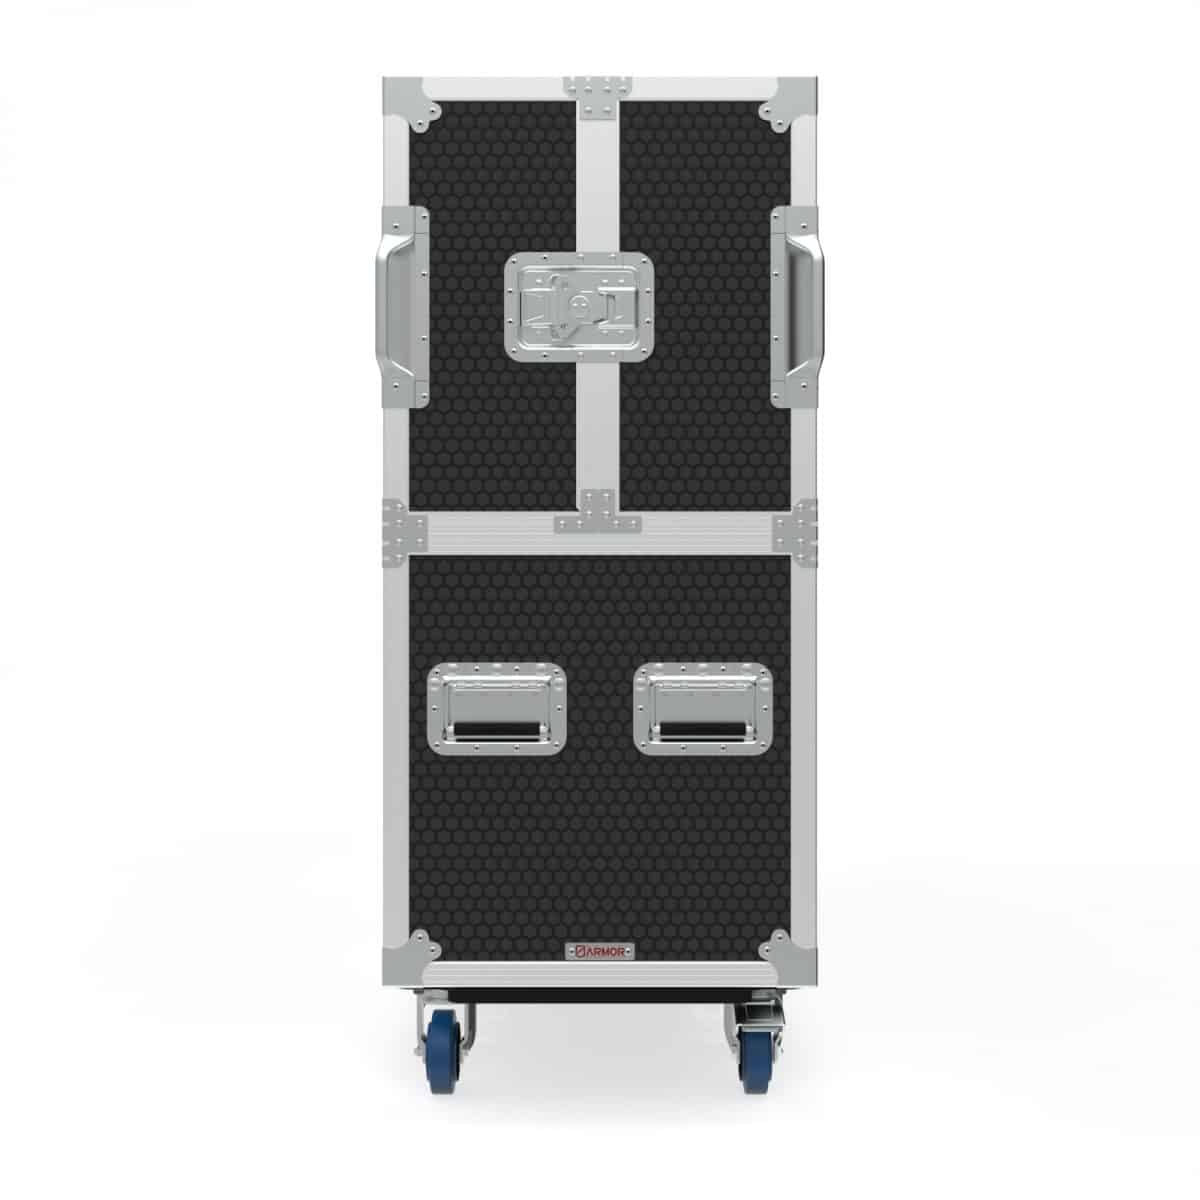 Twin TV Road Case with Clamshell Split Lid